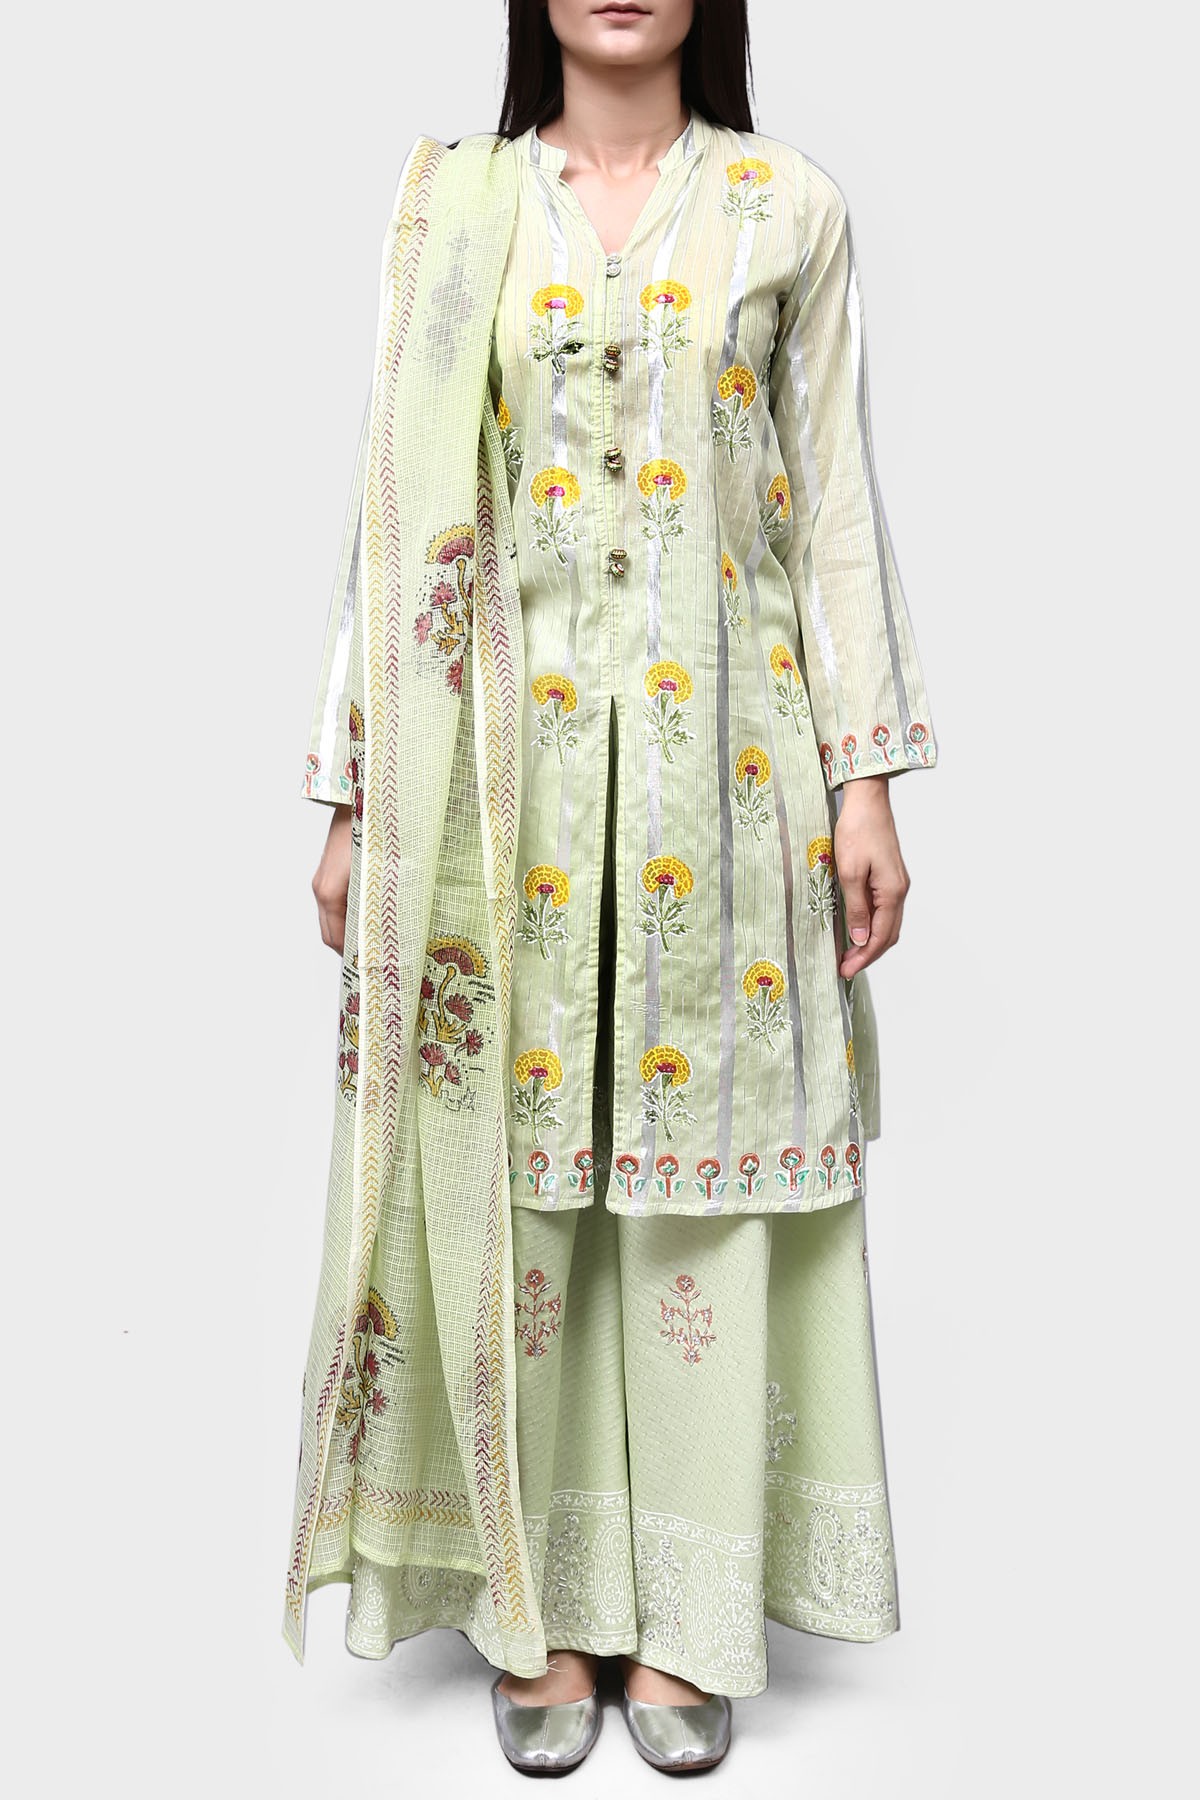 Pastel green vintage glore to wear dress by Generation part wear collection 2019 – Online Shopping In Pakistan